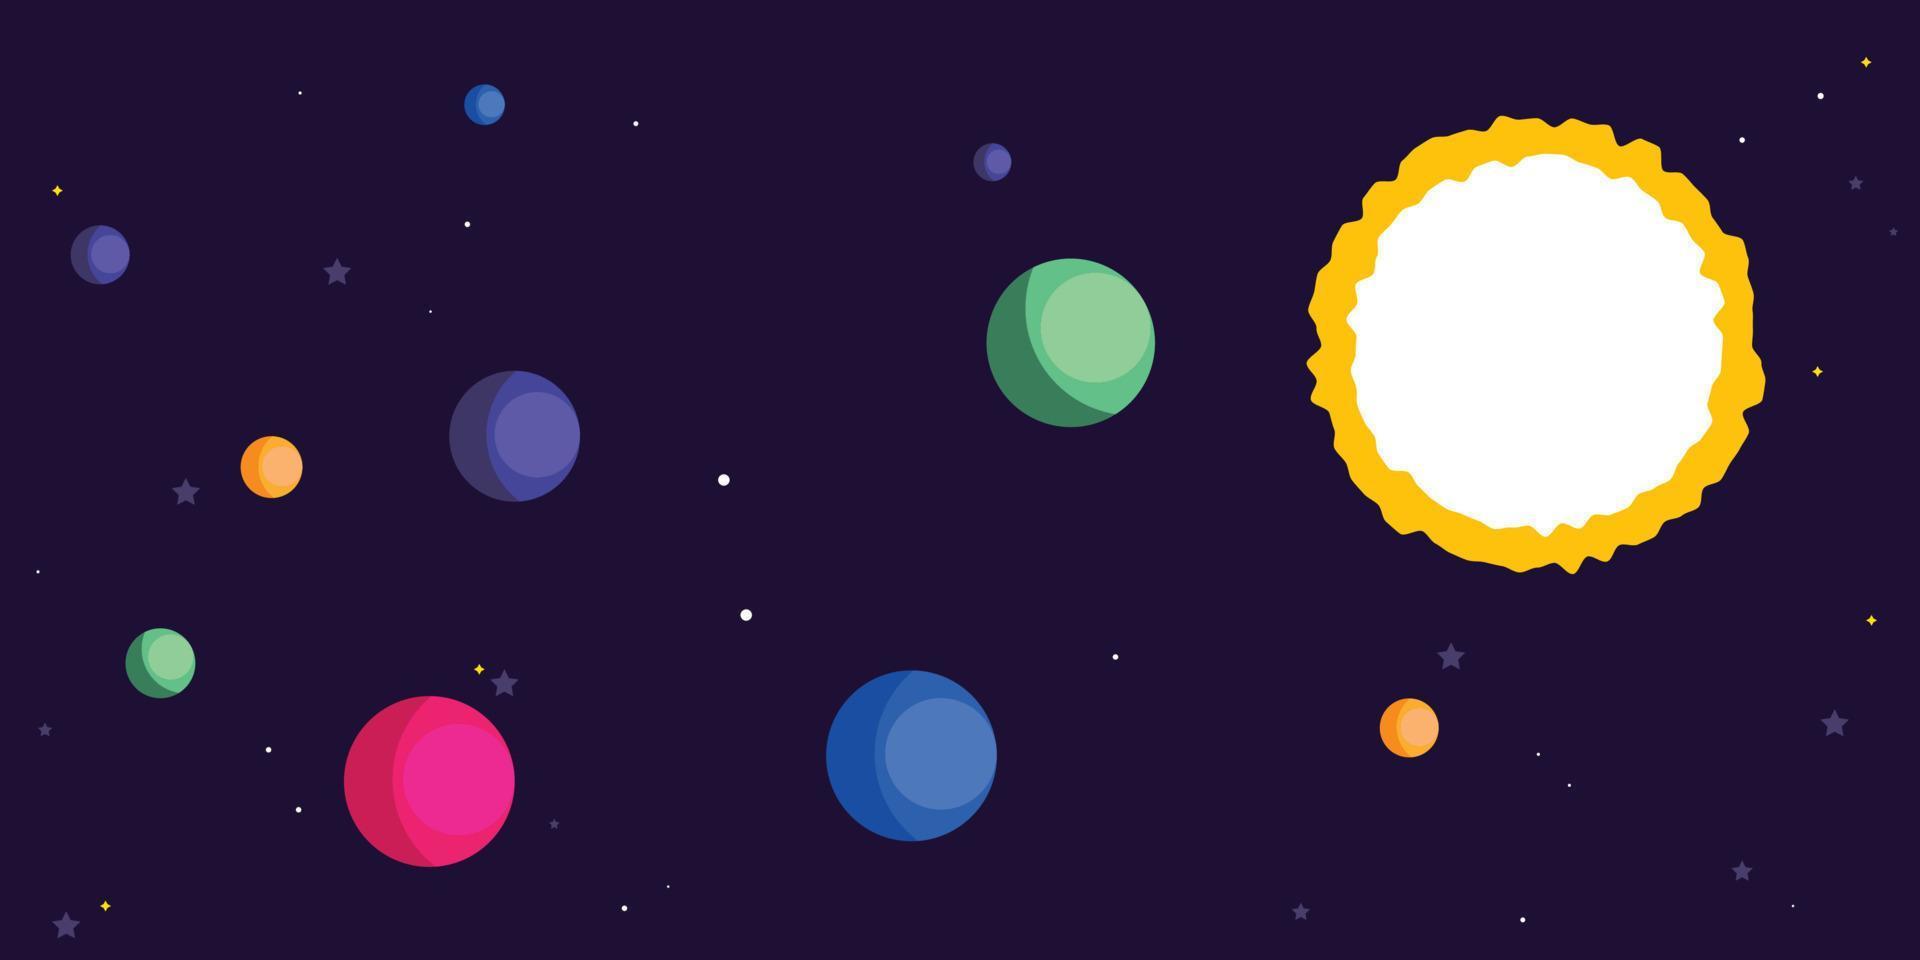 galaxy planets illustration vector icon background .eps